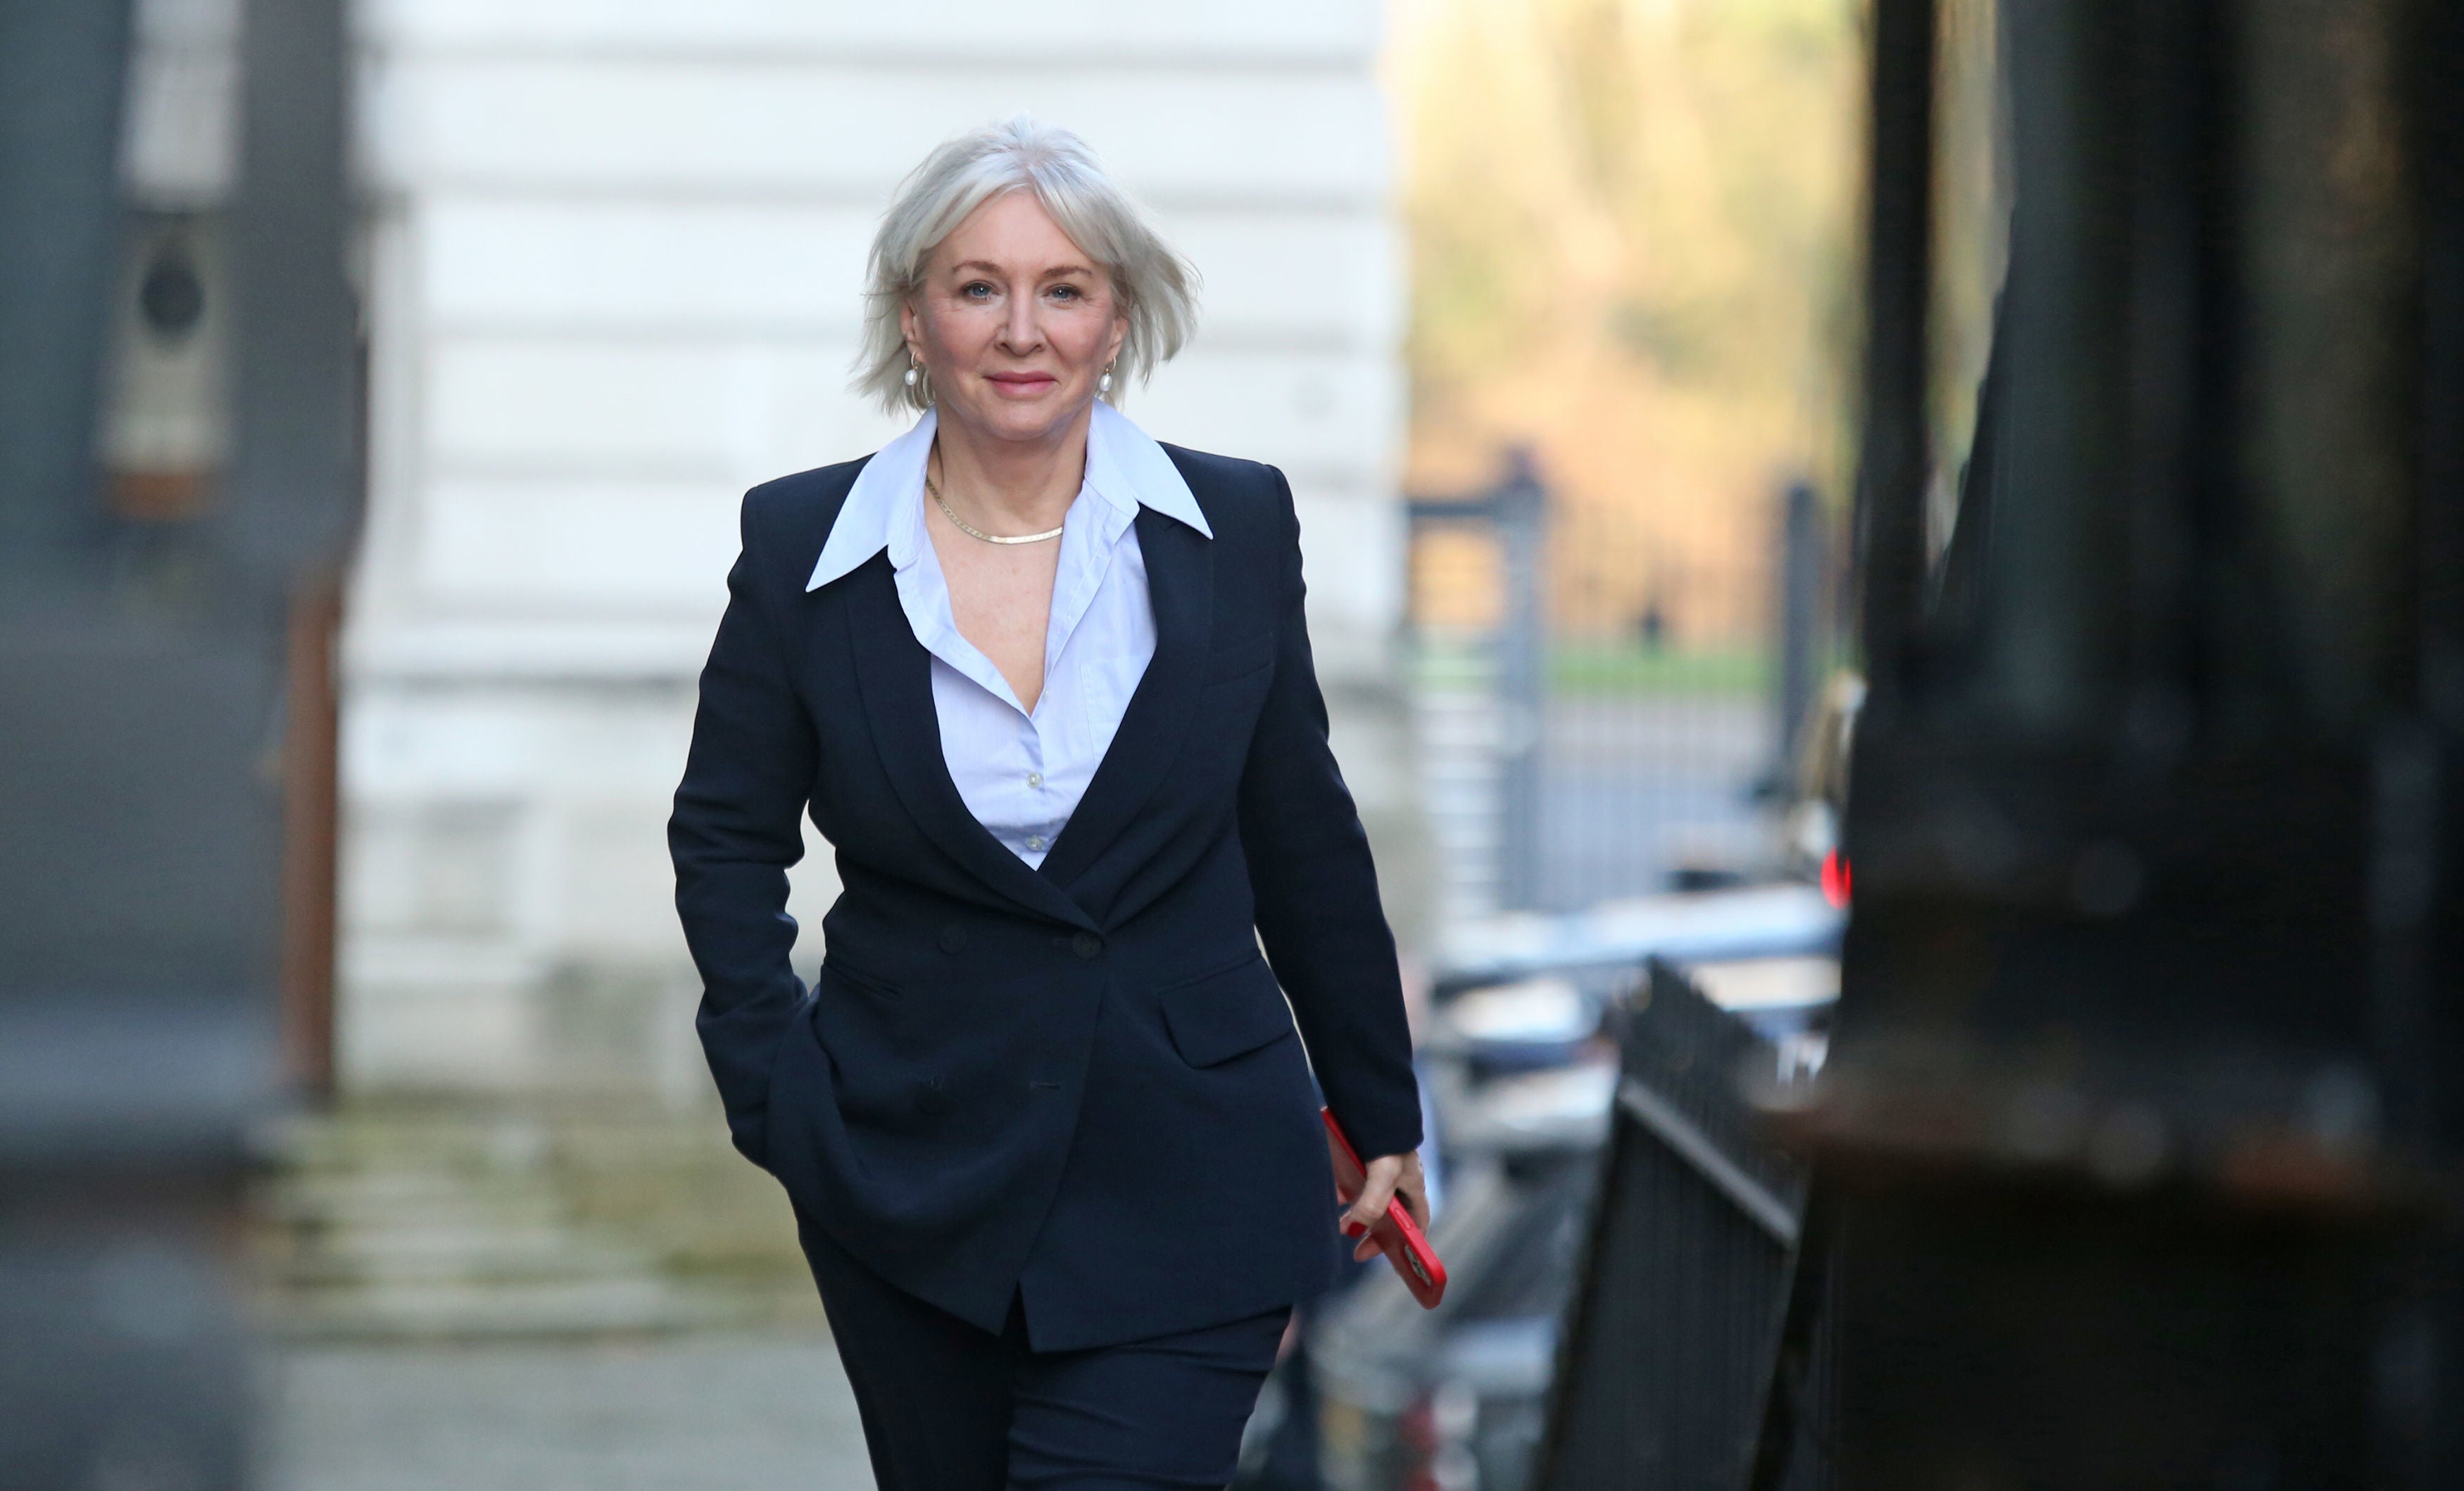 Culture Secretary Nadine Dorries laid out the future of English football governance